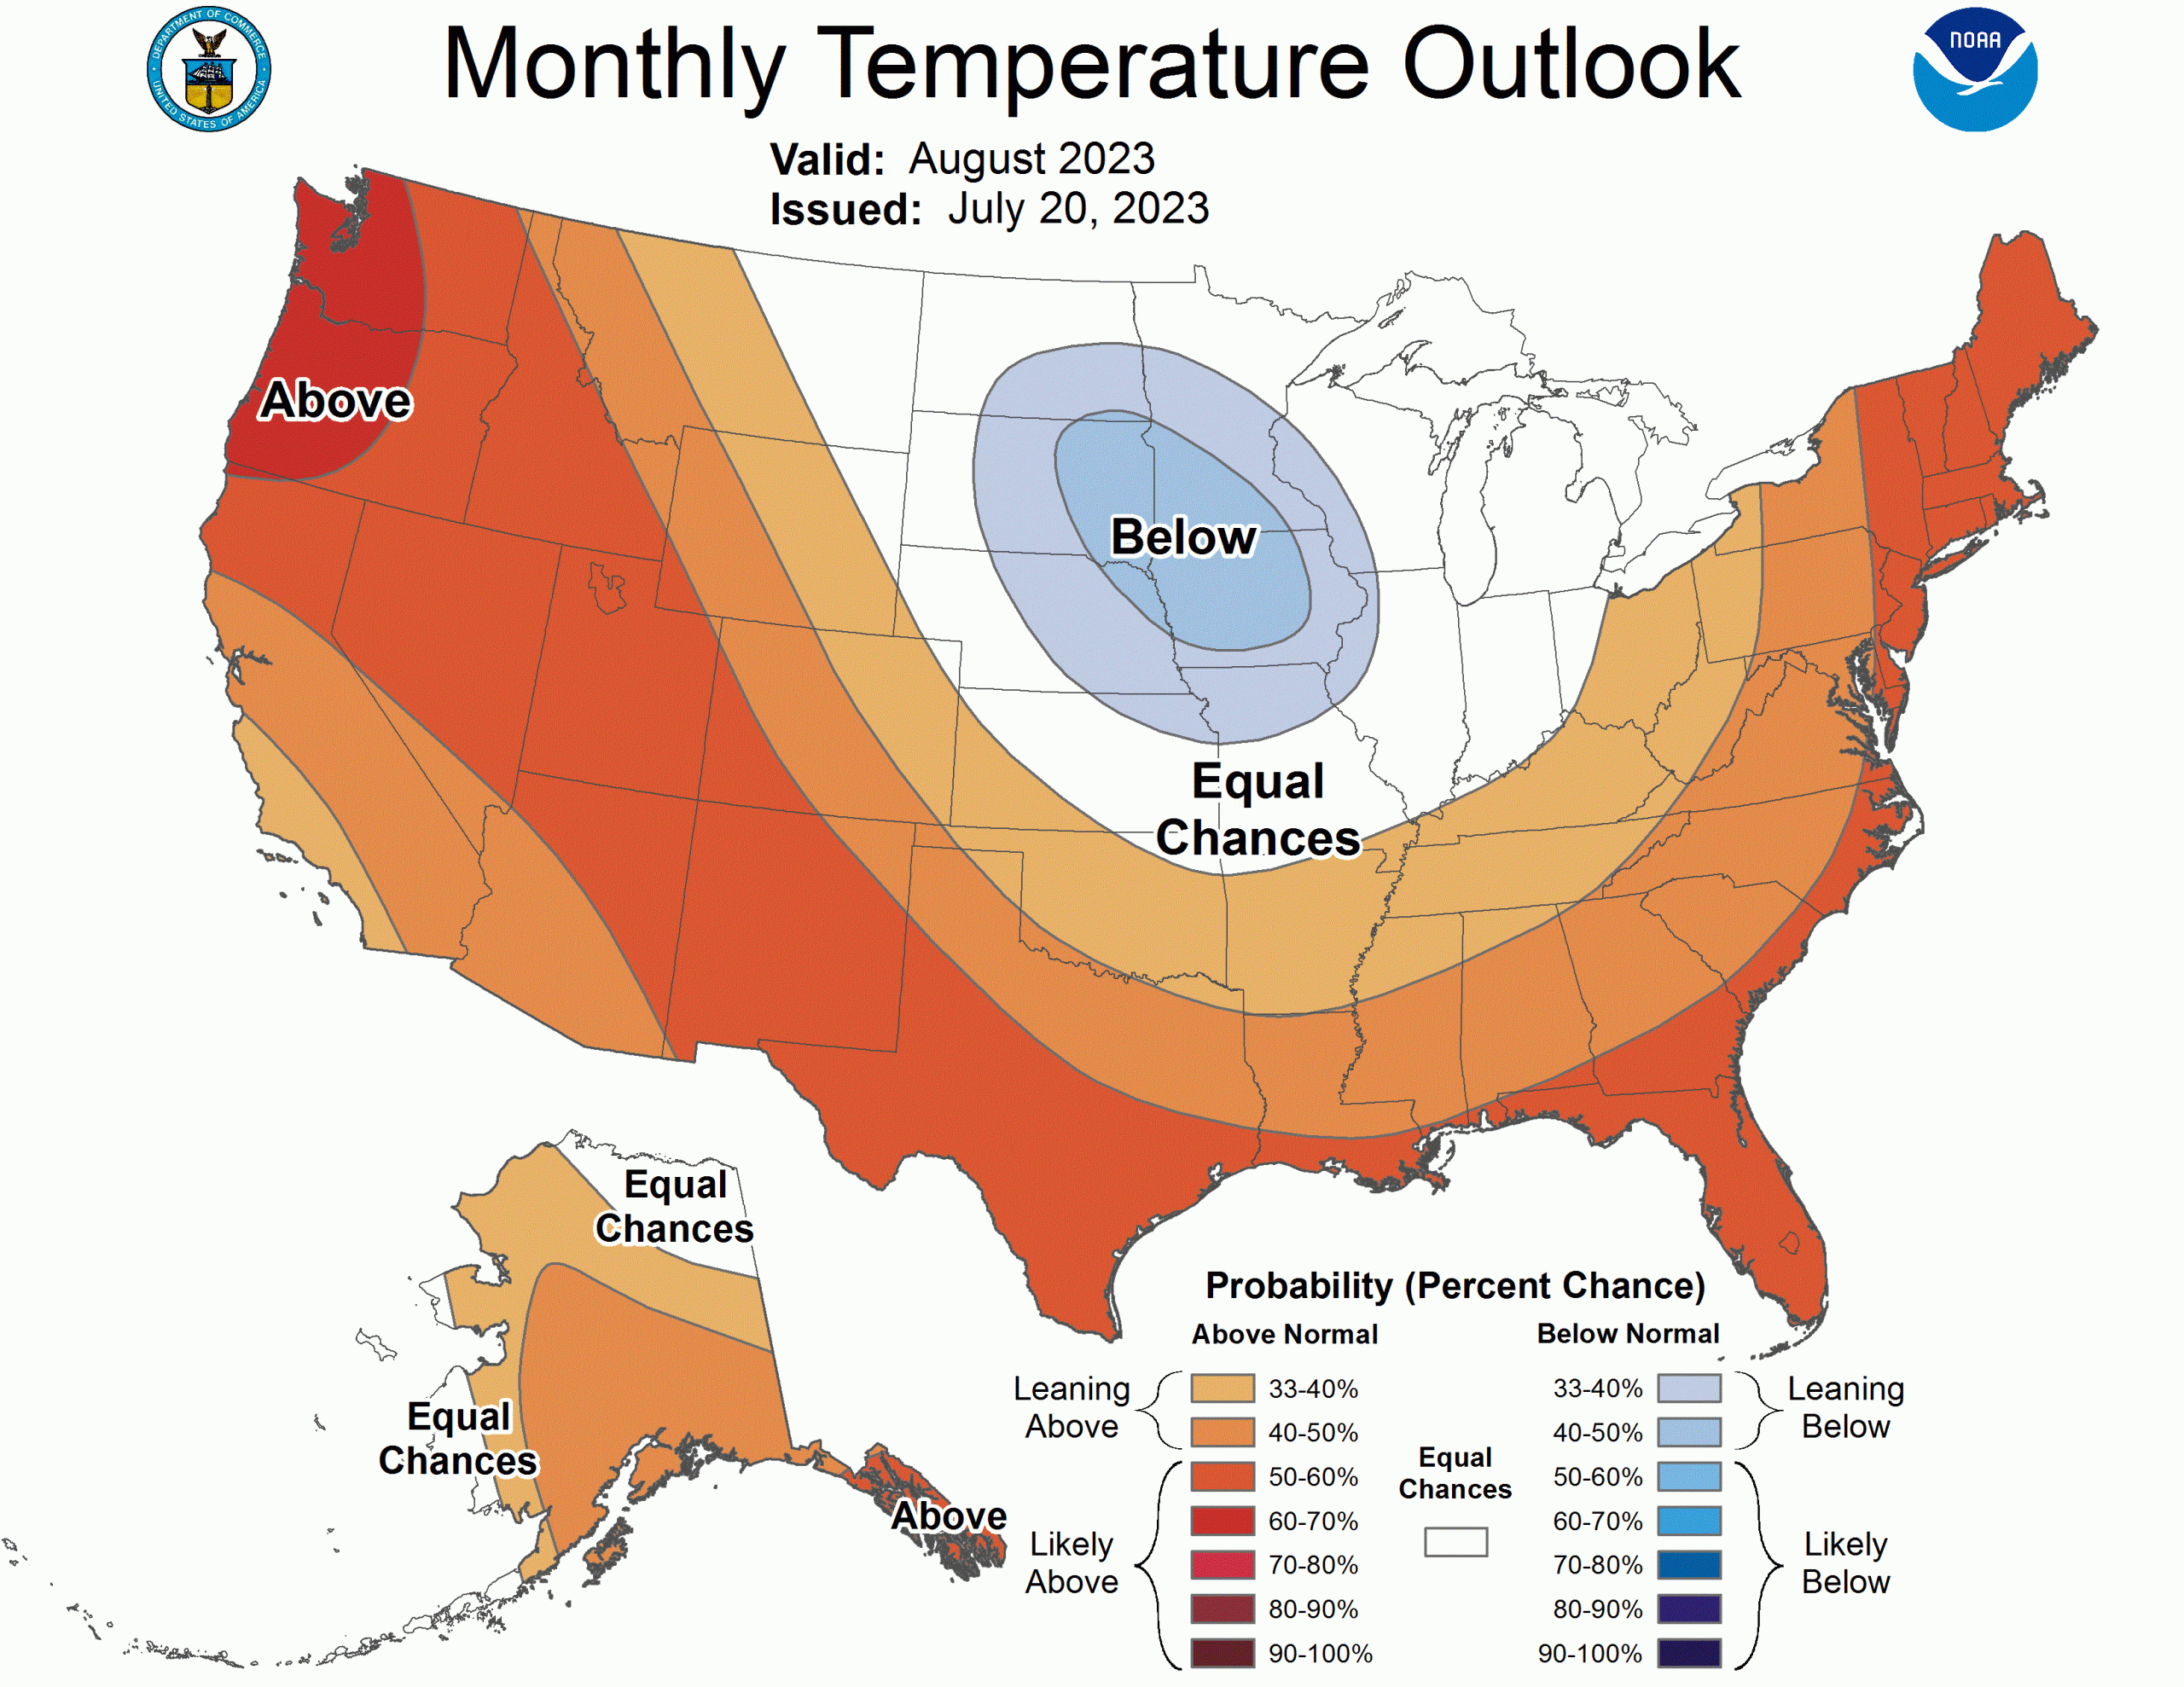 August 2023 outlook temperature